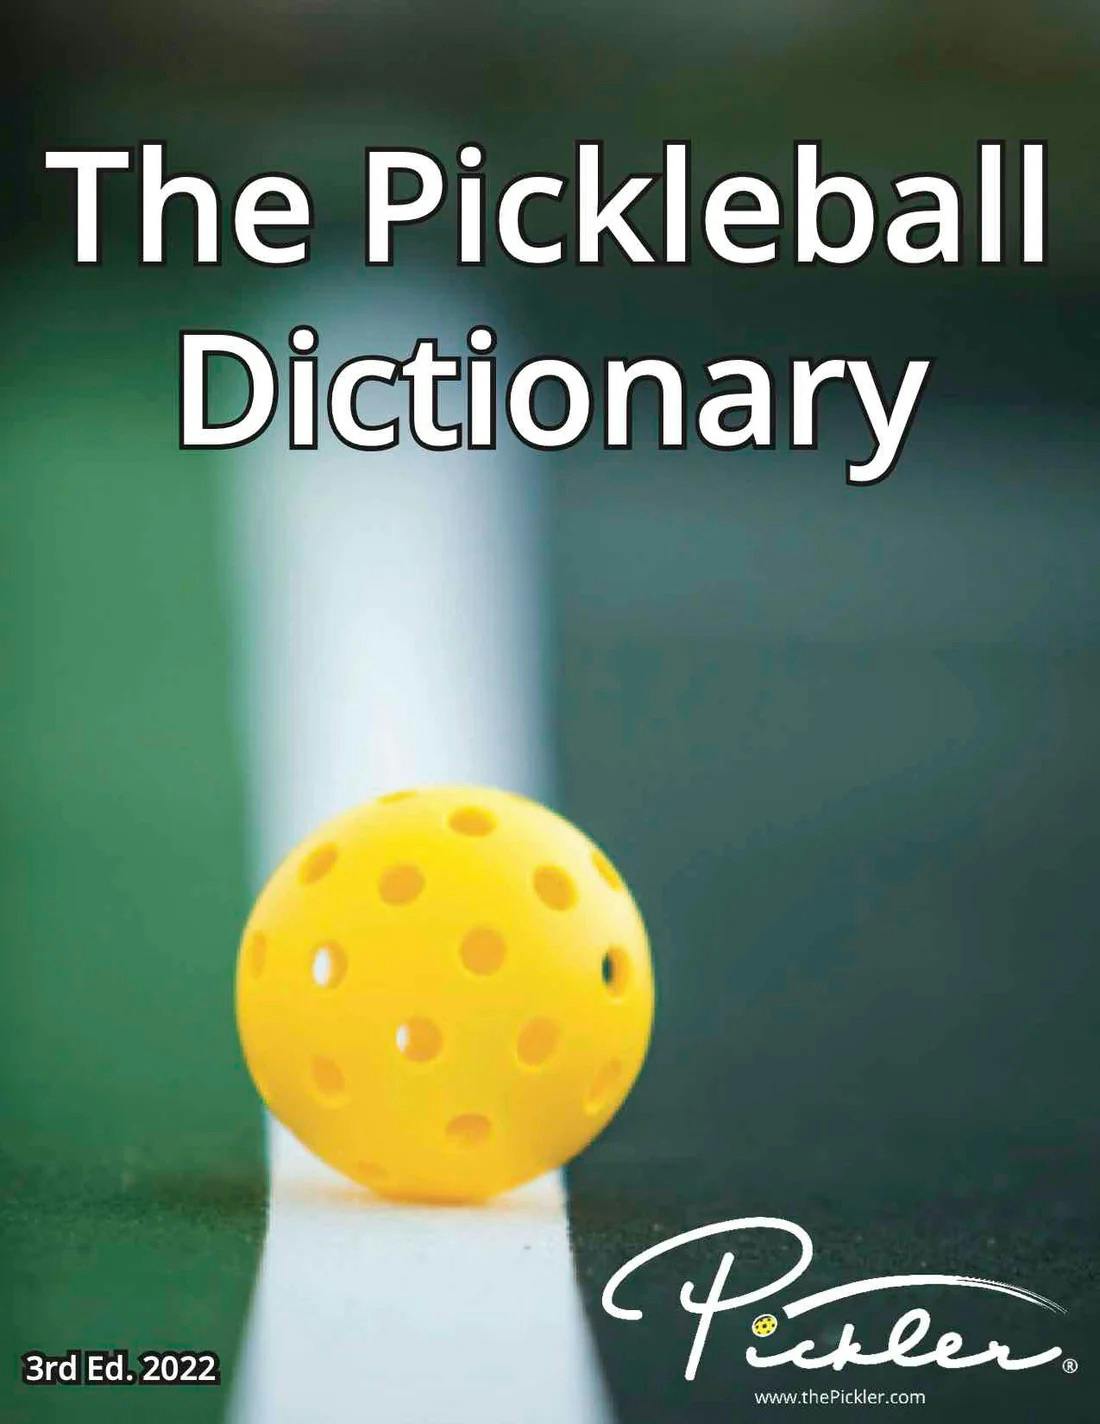 WHAT TO ADD TO THE PICKLEBALL DICTIONARY?